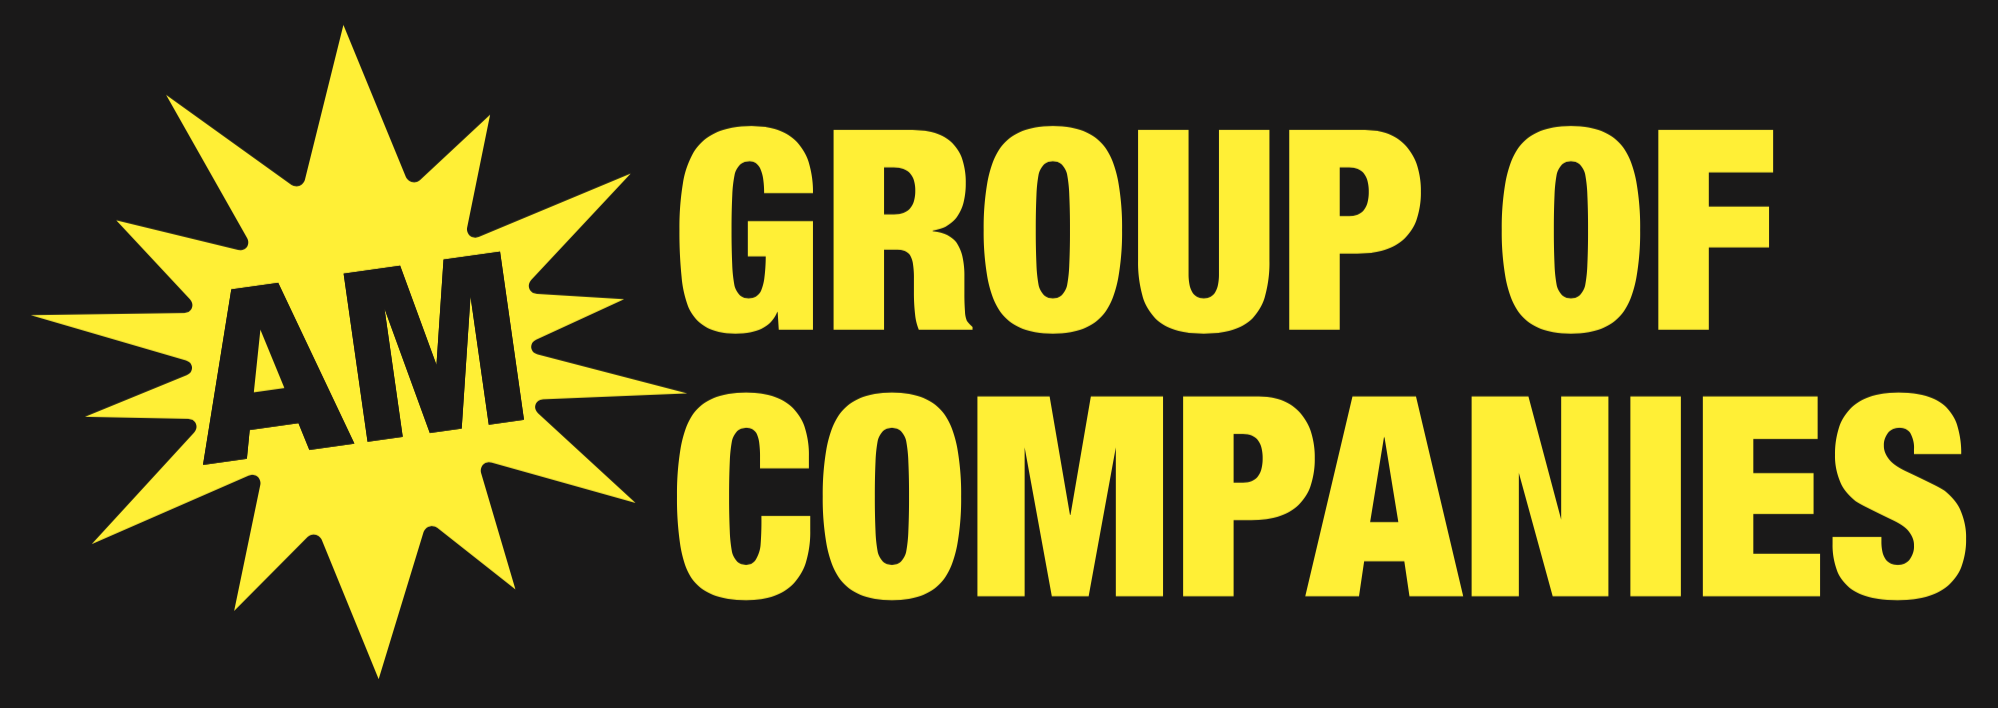 AM Group of Companies